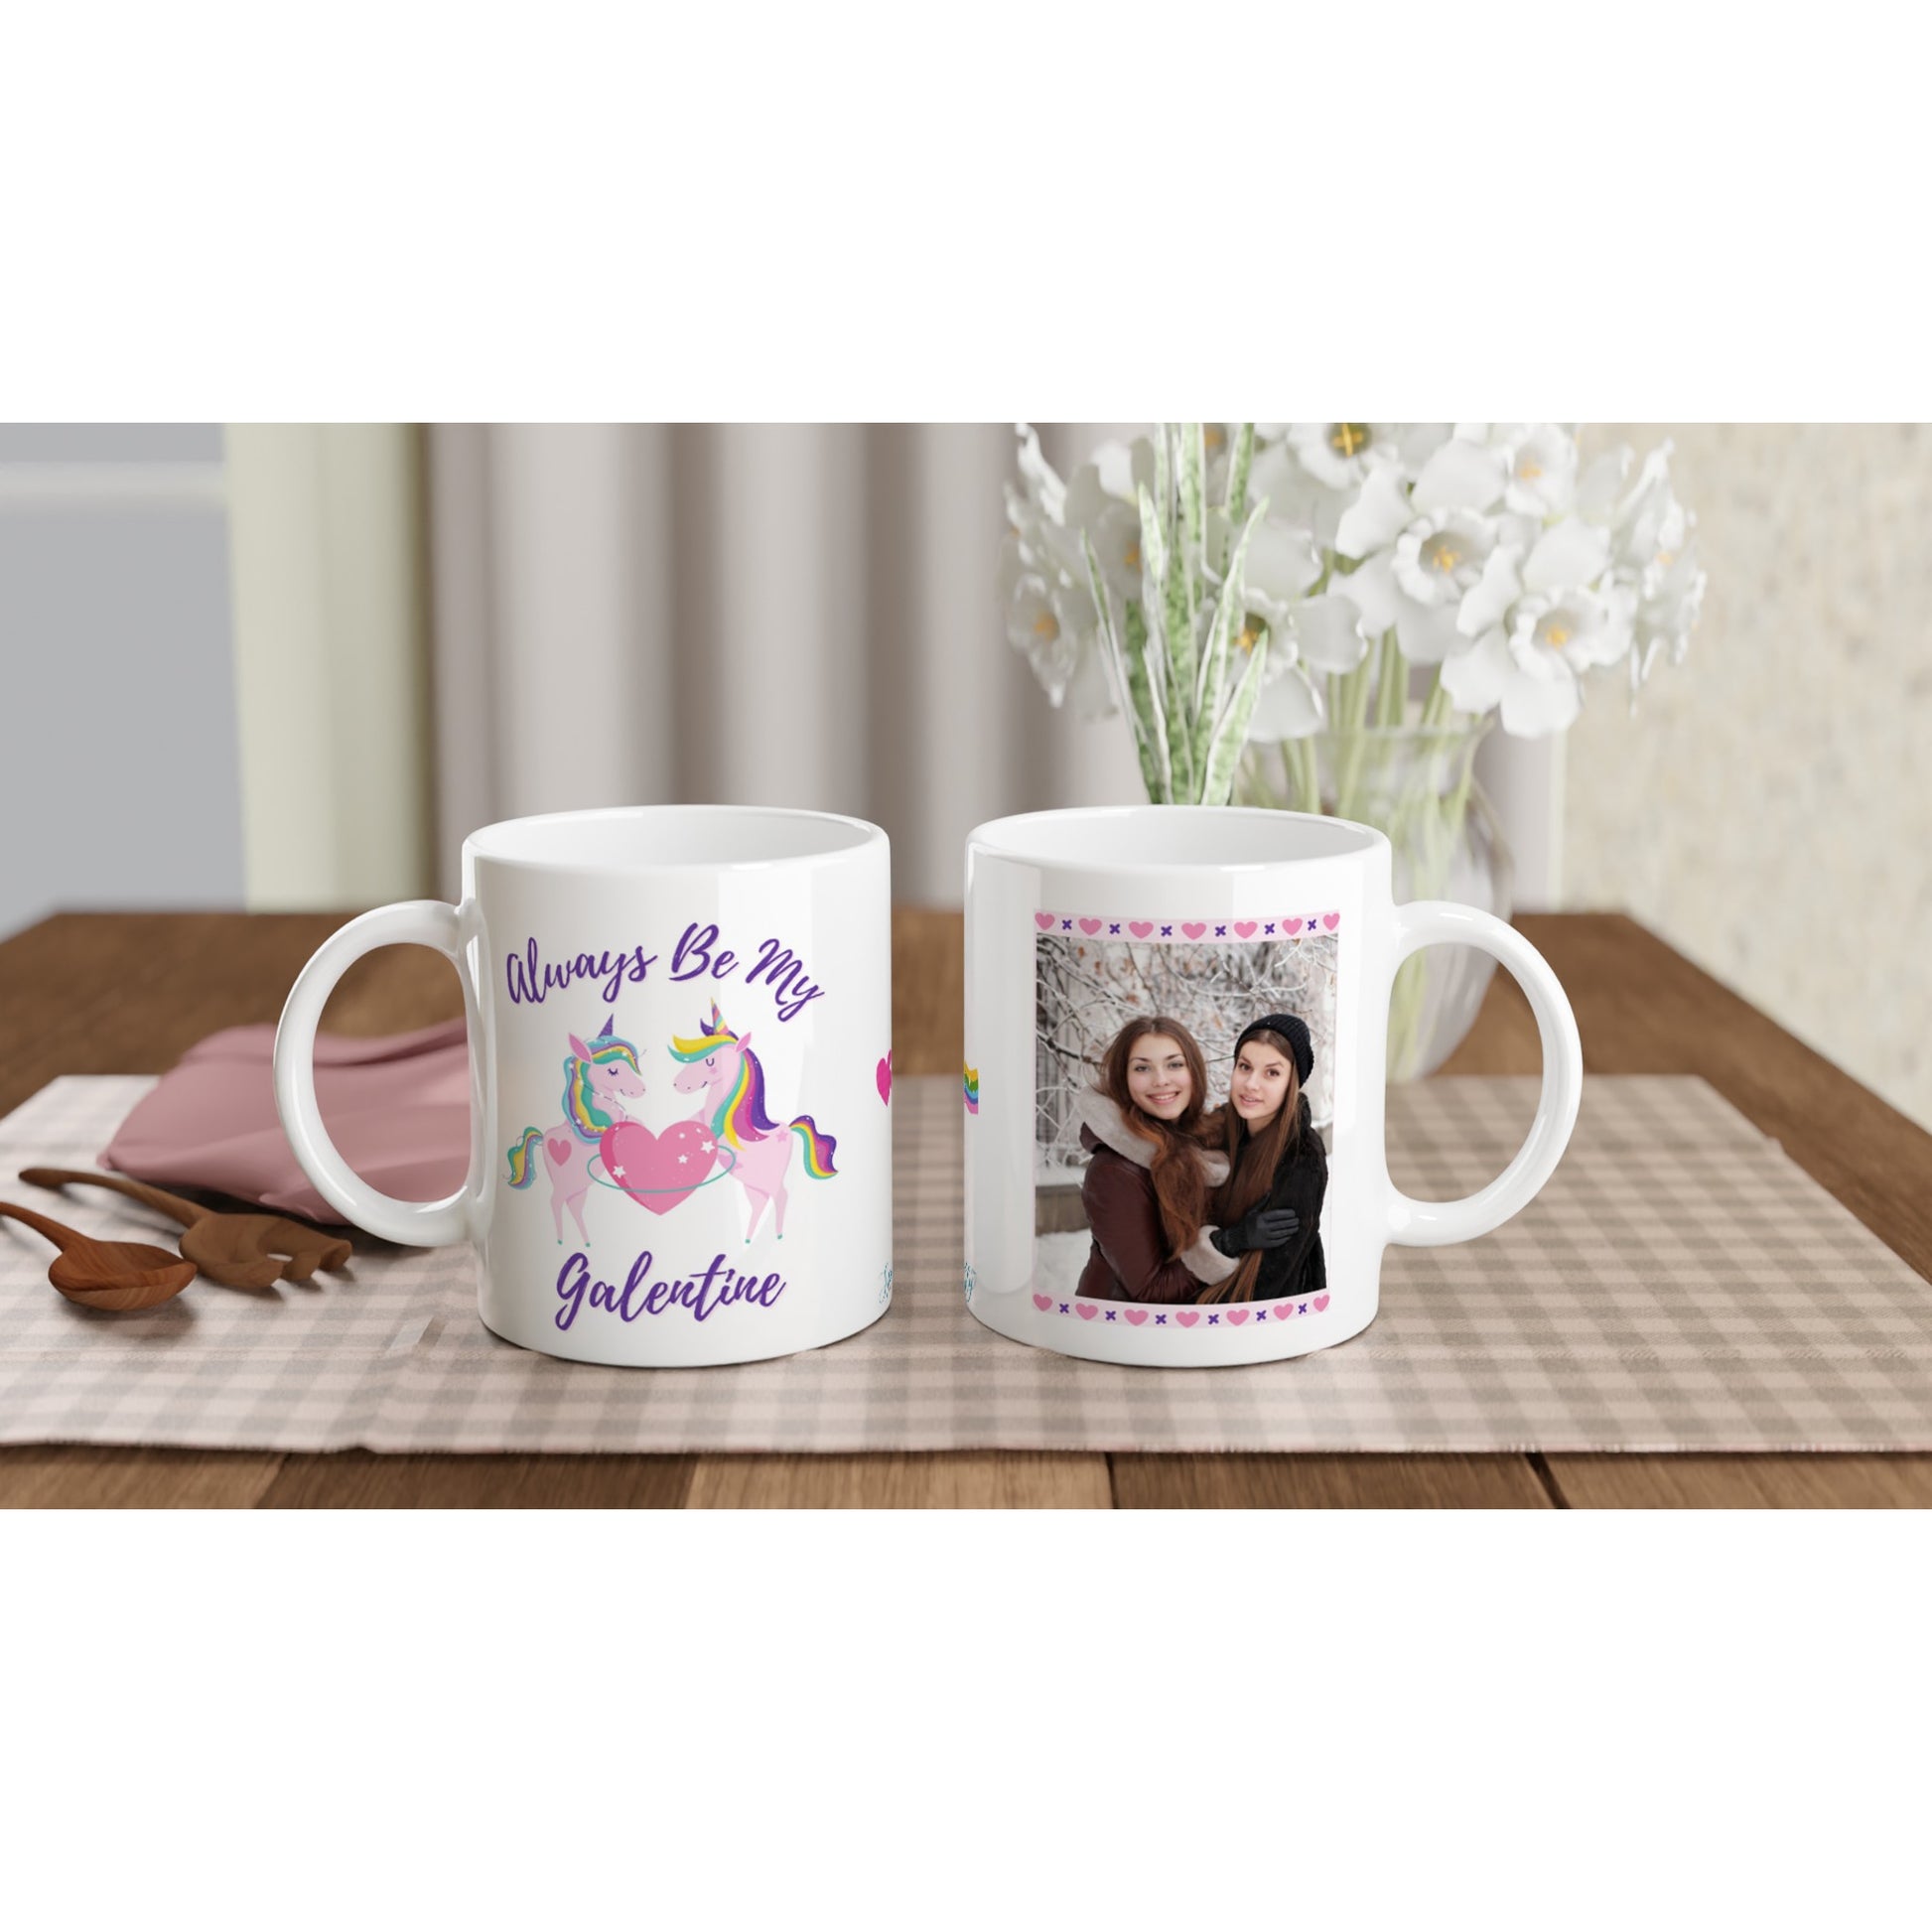 "Always be my Galentine" Customizable Photo 11 oz. Mug front and back view in scene 